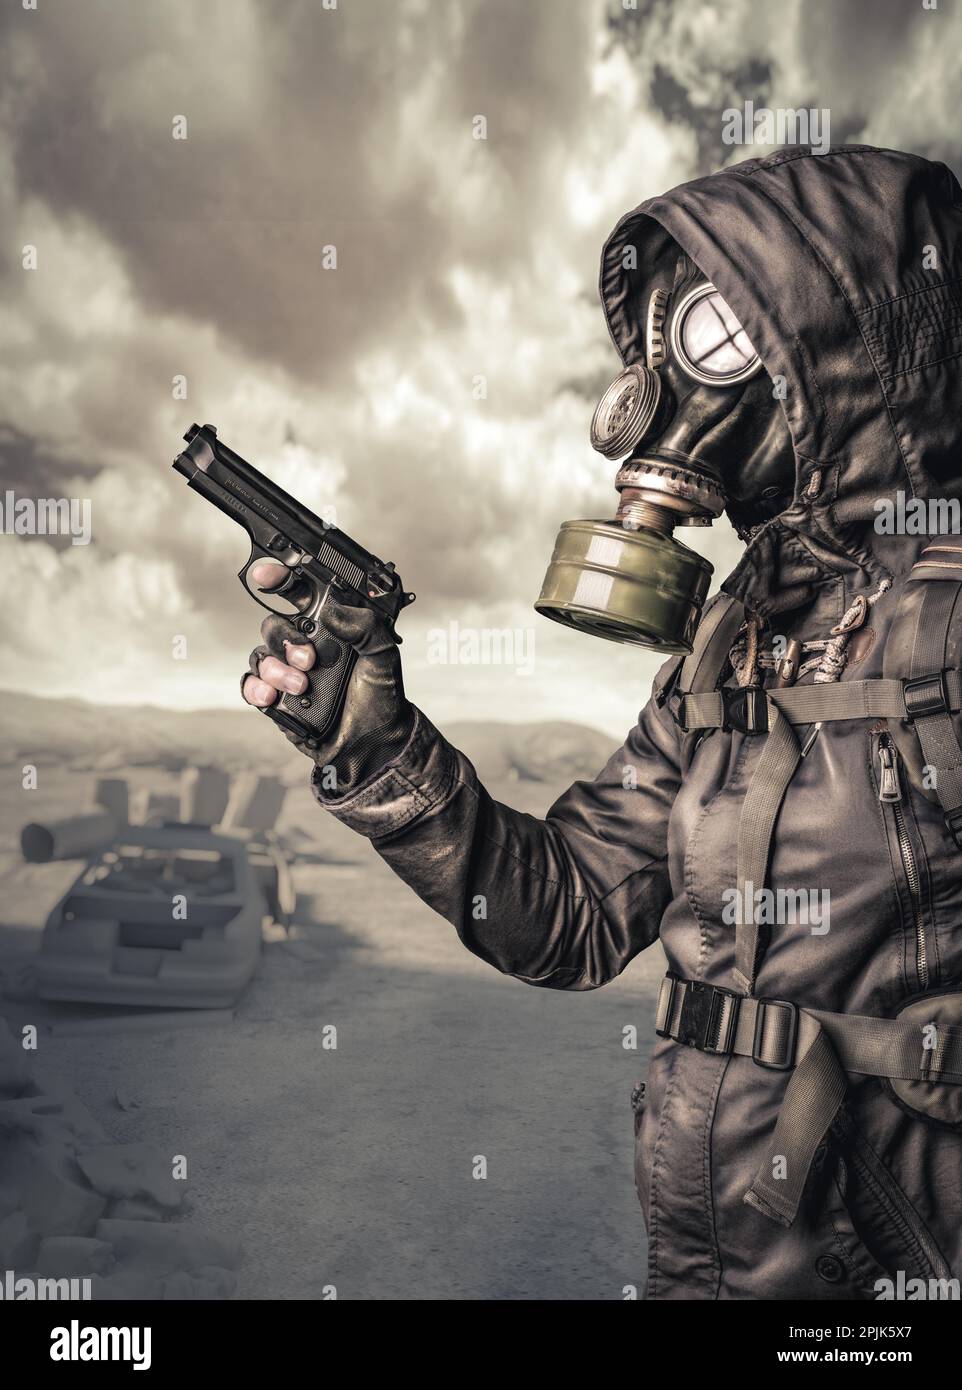 armed man with gas mask in a post-apocalyptic situation Stock Photo